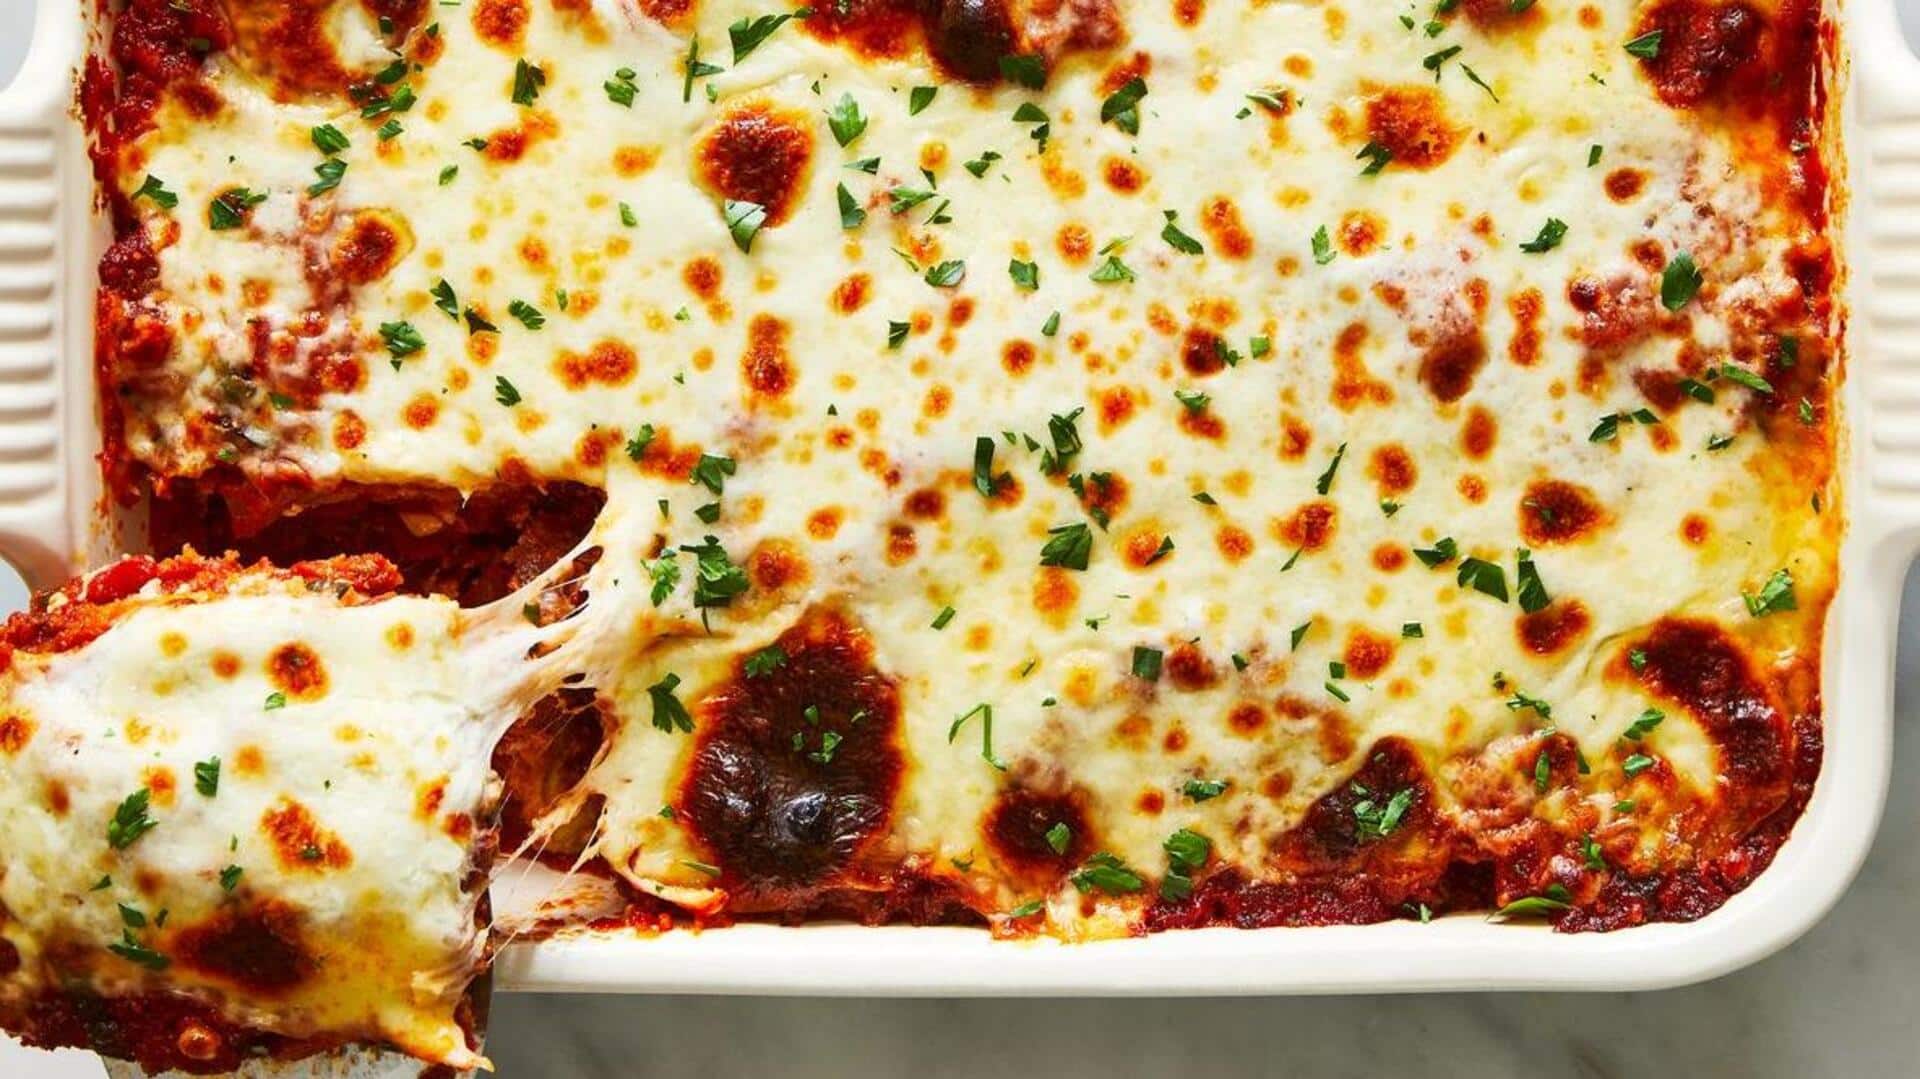 It's recipe time! Impress your guests with eggplant Parmesan